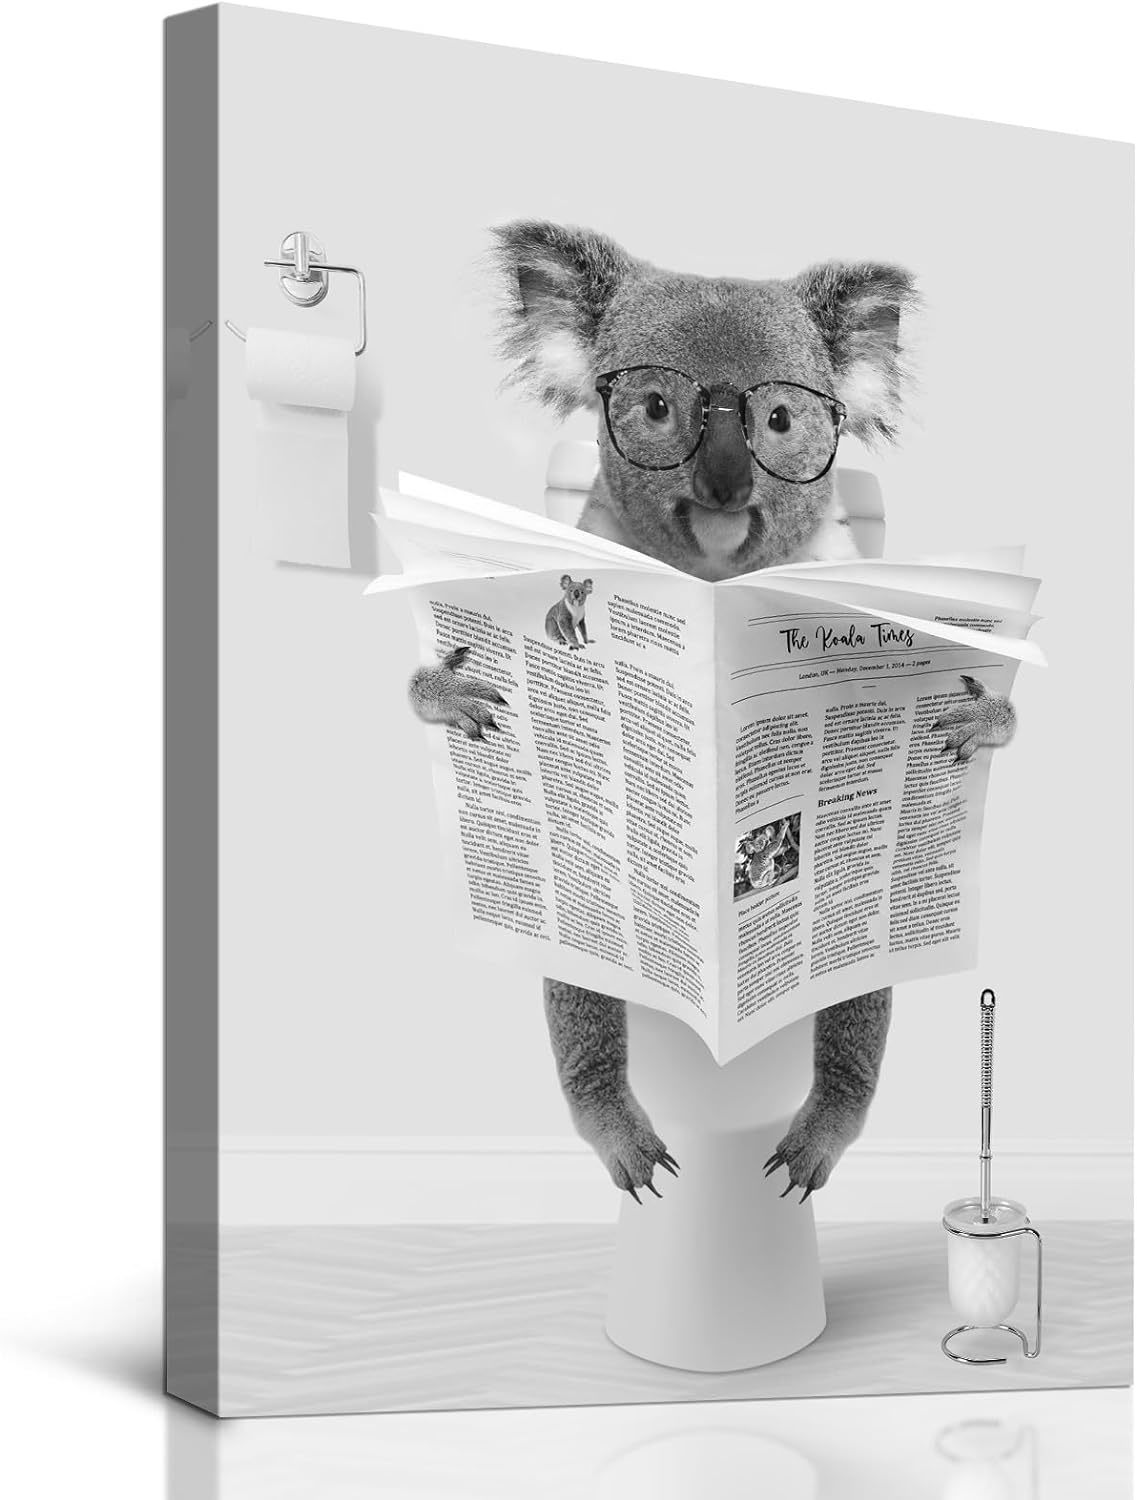 Funny Animals Wall Art Cute Koala Reading Newspapers in the Toilet Canvas Prints - $37.66